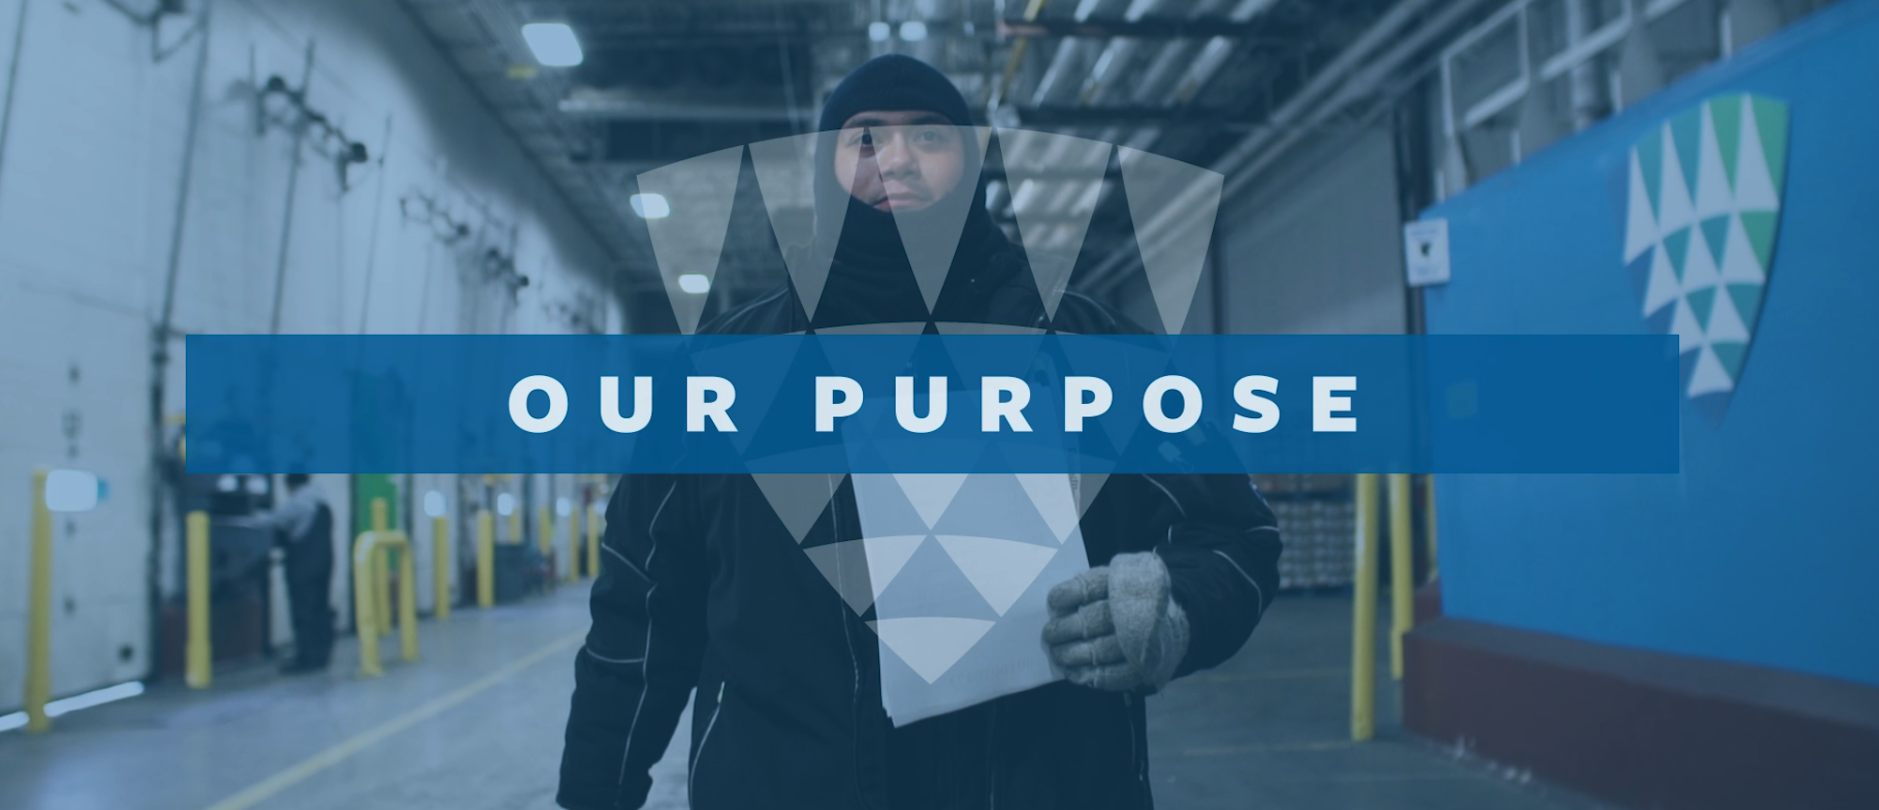 Lineage employee in cold storage warehouse with Lineage logo and "our purpose" overlayed